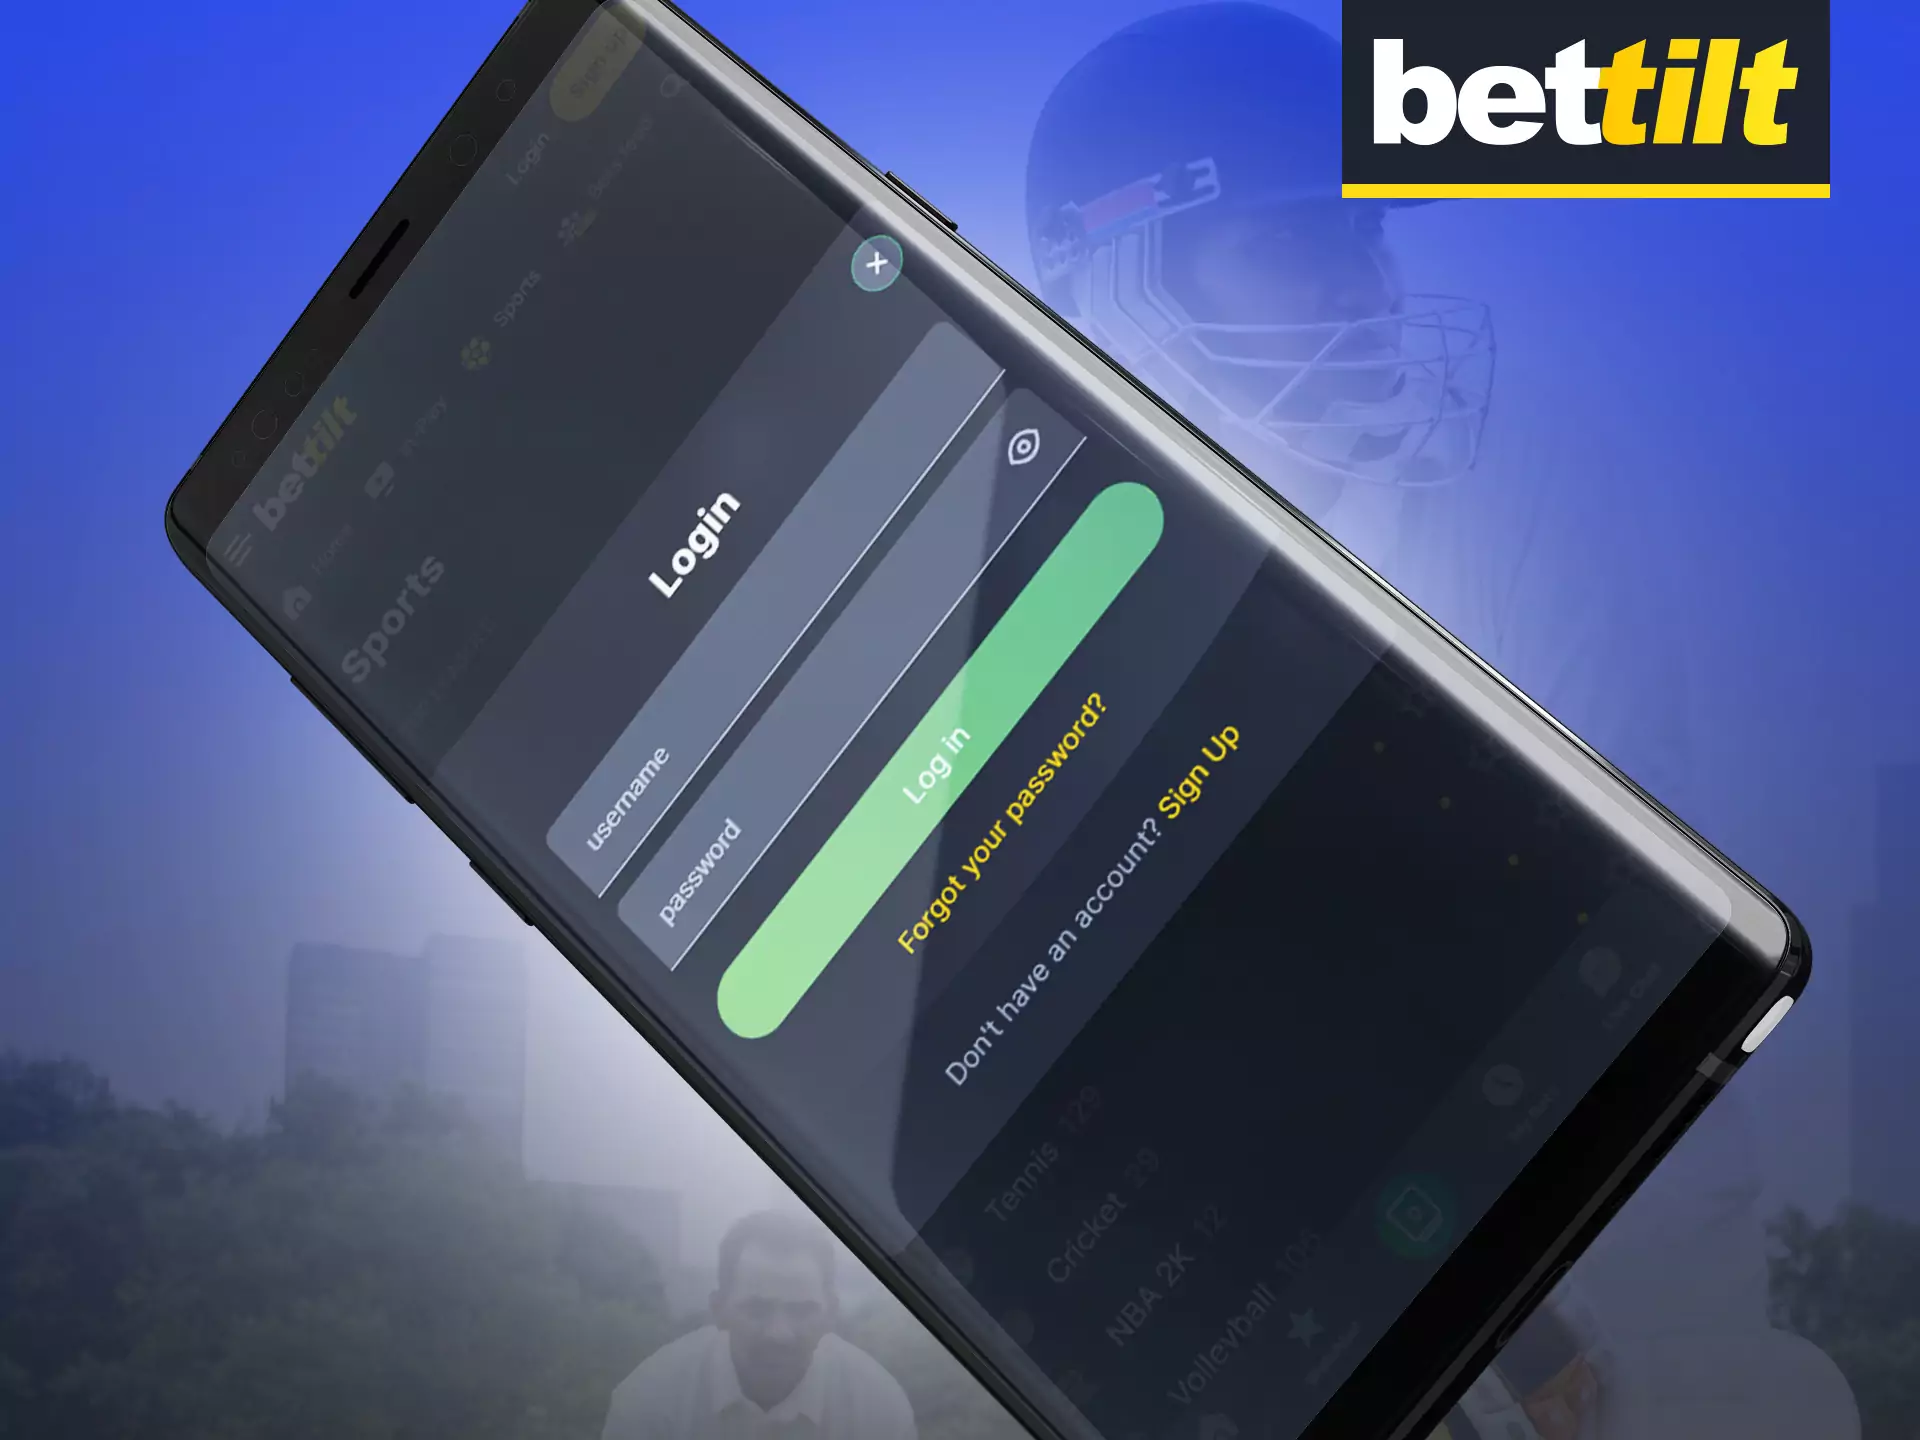 In the Bettilt app log in to your account.